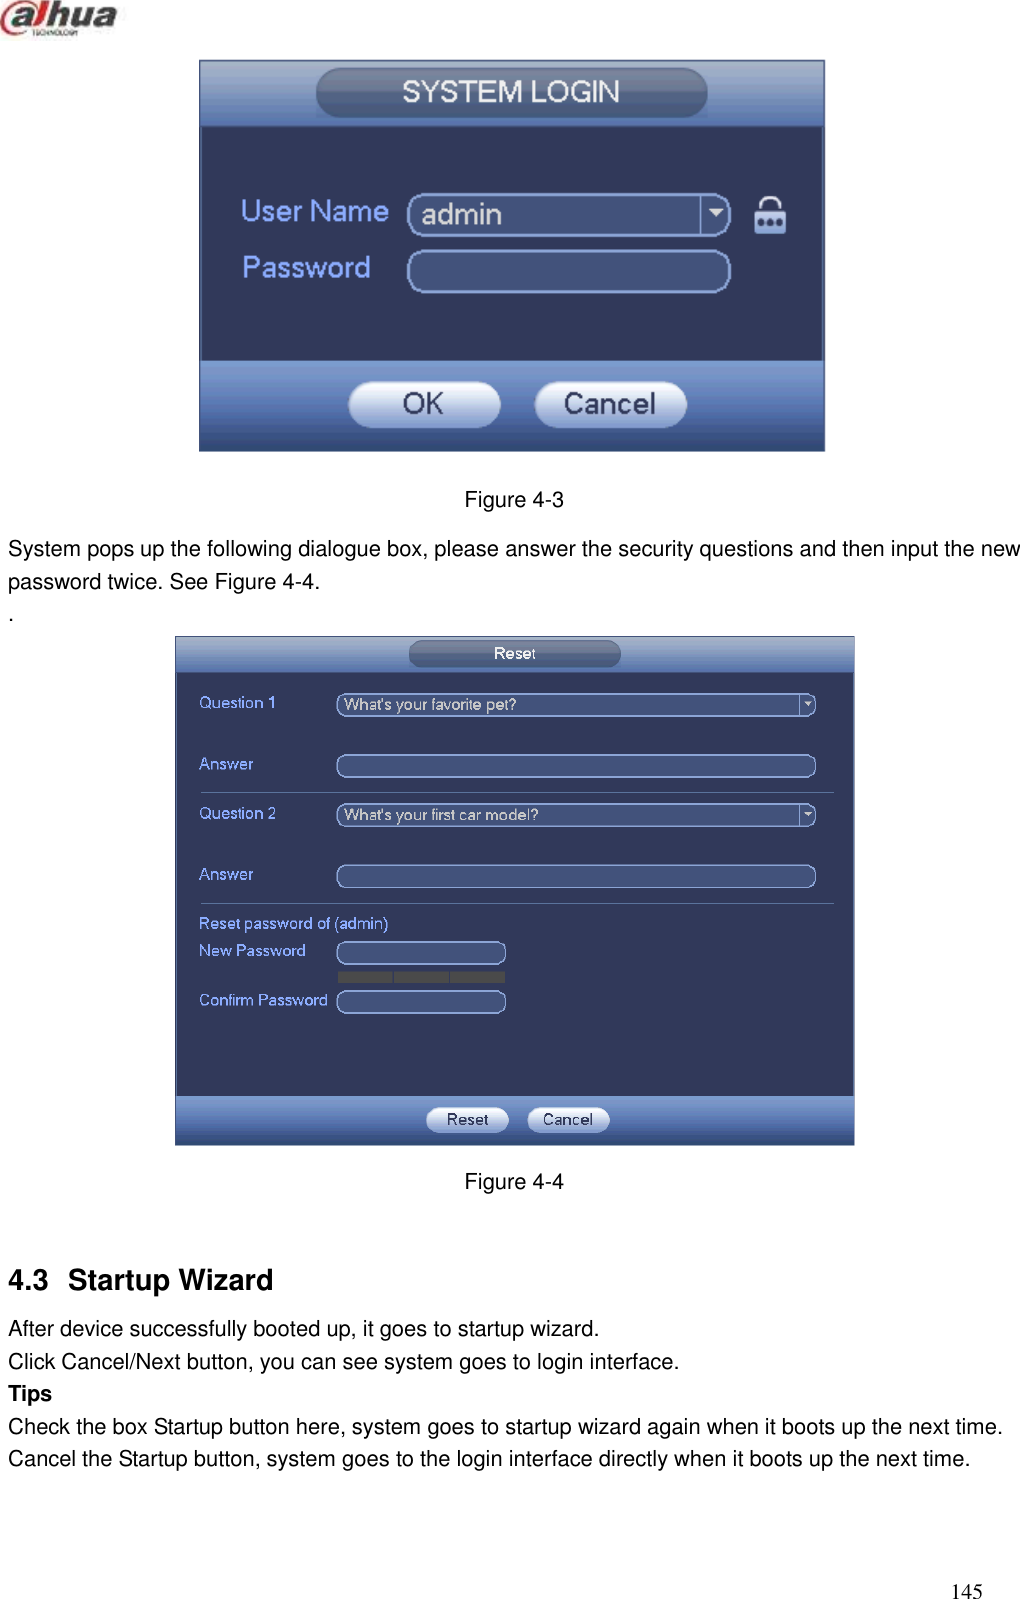  145   Figure 4-3 System pops up the following dialogue box, please answer the security questions and then input the new password twice. See Figure 4-4. .  Figure 4-4  4.3  Startup Wizard   After device successfully booted up, it goes to startup wizard.   Click Cancel/Next button, you can see system goes to login interface.   Tips Check the box Startup button here, system goes to startup wizard again when it boots up the next time.   Cancel the Startup button, system goes to the login interface directly when it boots up the next time.   